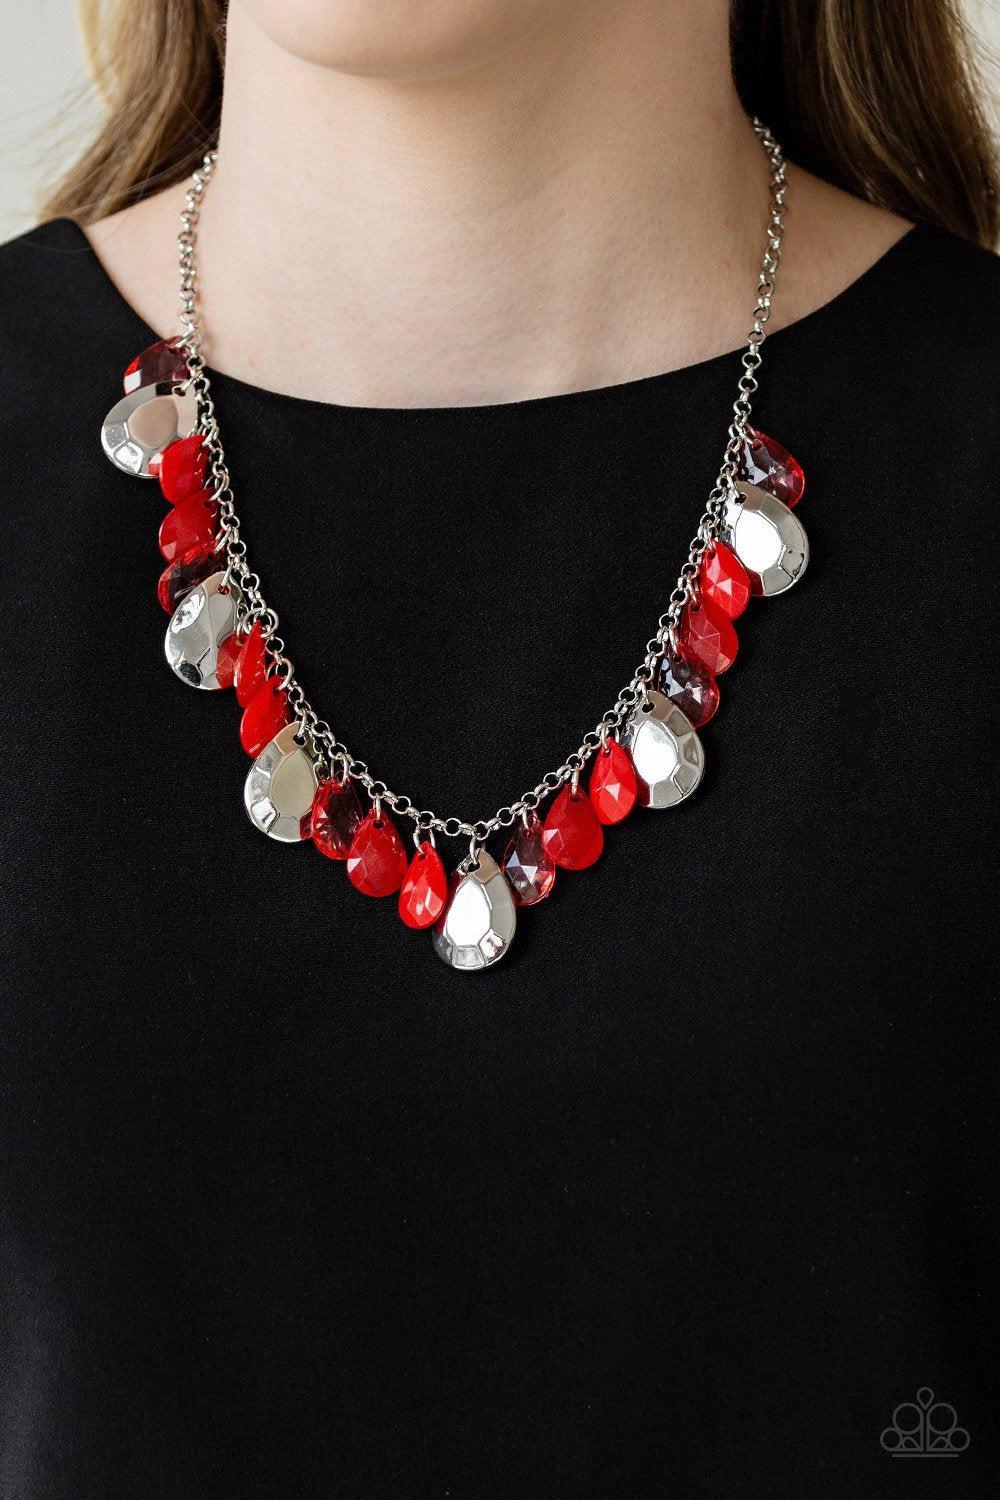 Hurricane Season Red and Silver Necklace - Paparazzi Accessories - model -CarasShop.com - $5 Jewelry by Cara Jewels